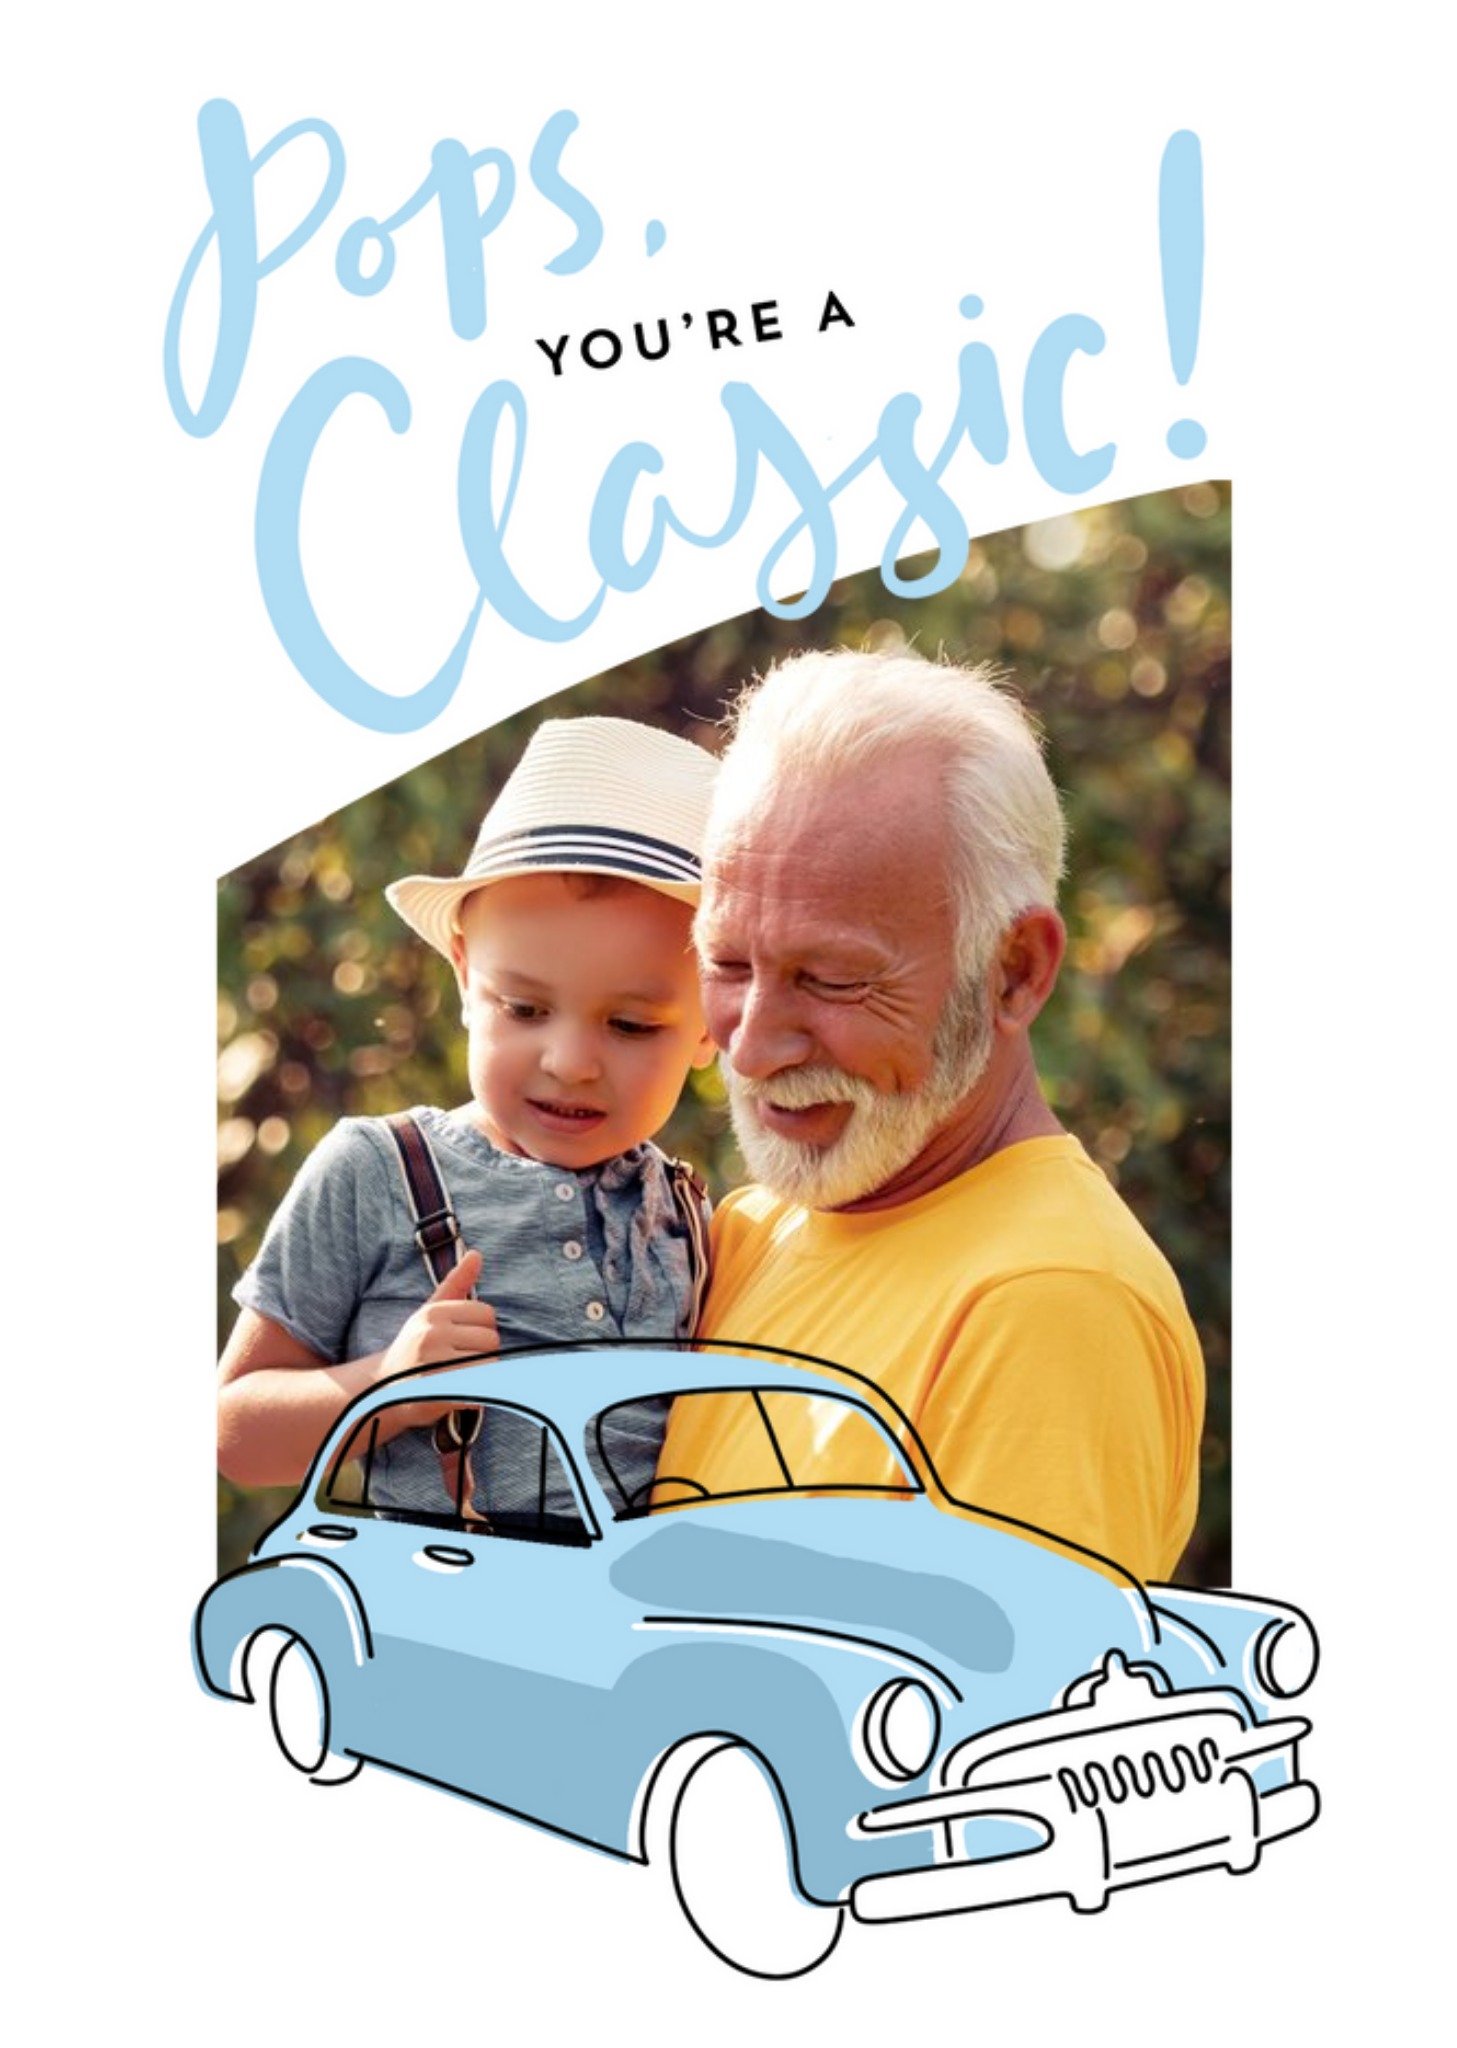 Moonpig Simple Life Illustrated Vintage Car Photo Upload Pops, You're A Classic Card, Large